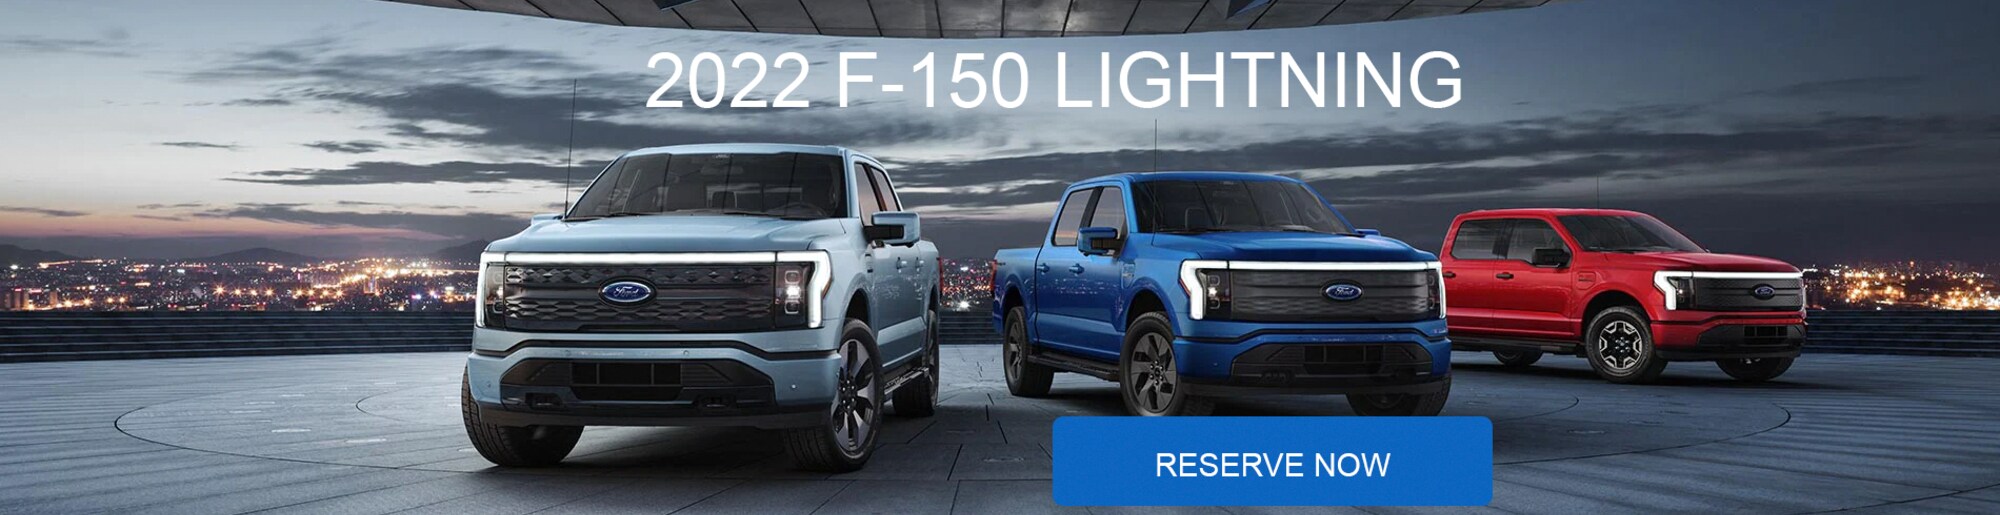 New Ford Cars & Trucks |Willowbrook Ford| Serving Westmont IL.